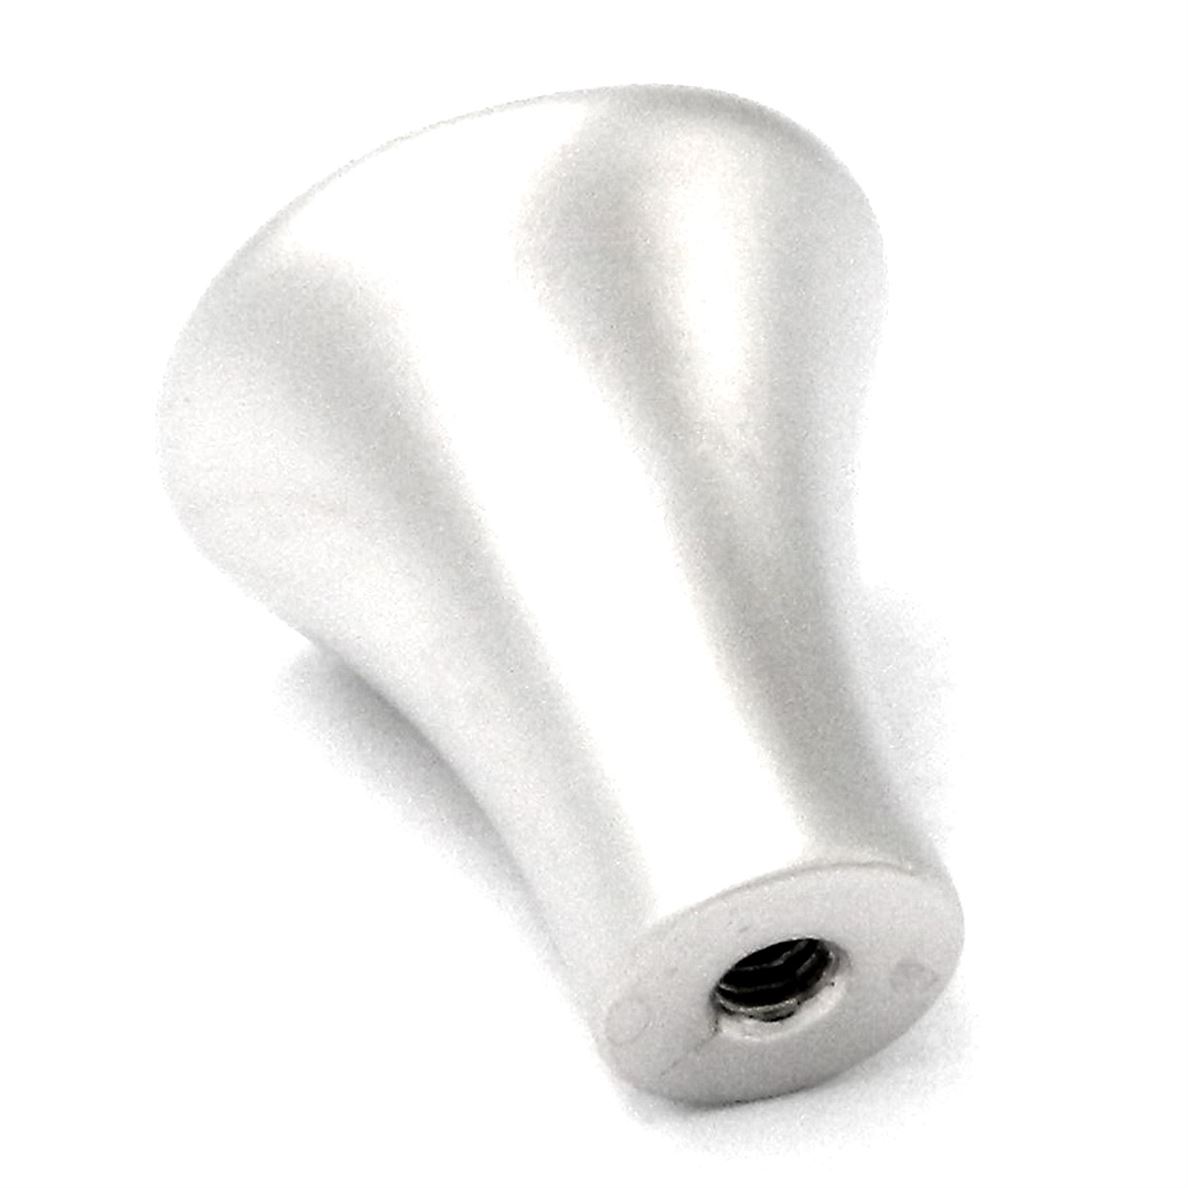 Hickory Hardware PA0213-PN 1-Inch Metropolis Fluted Cabinet Knob Pearl Nickel